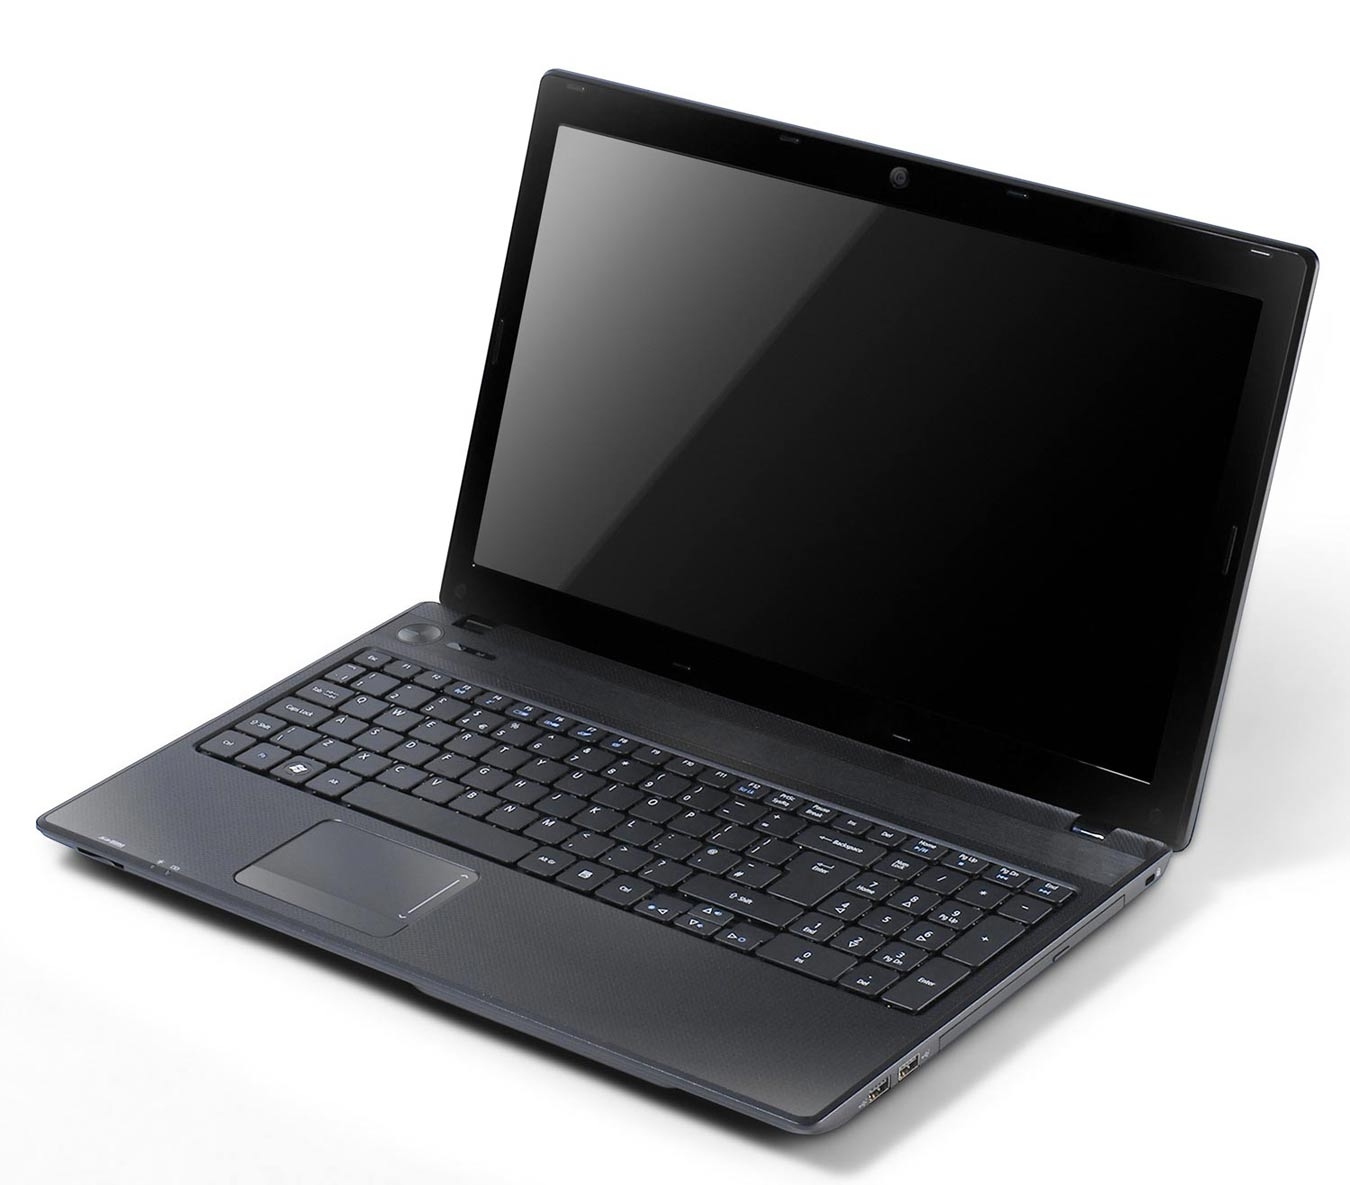 Acer Aspire 7745G Drivers Download for Windows 7 64-bit ...